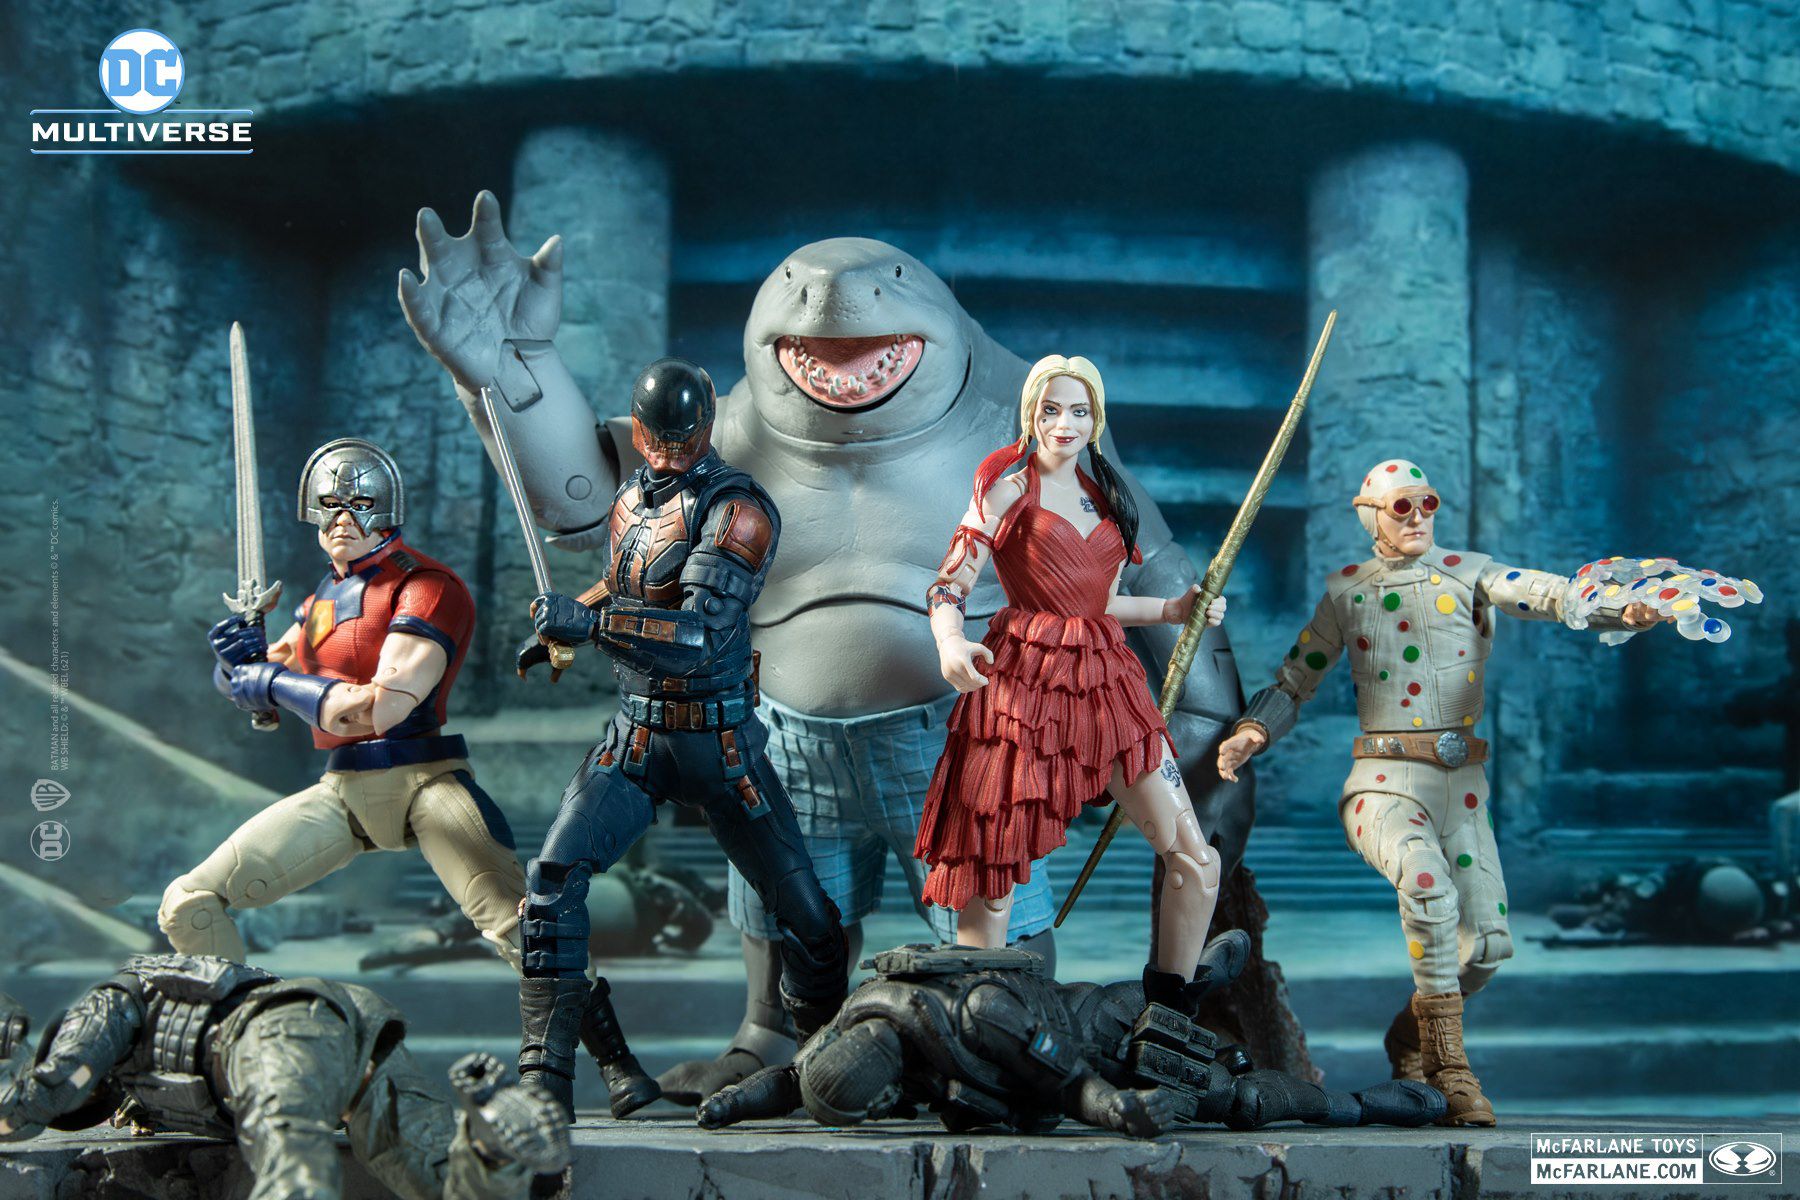 The Suicide Squad Director Reveals New McFarlane Toys For Upcoming DCEU Movie